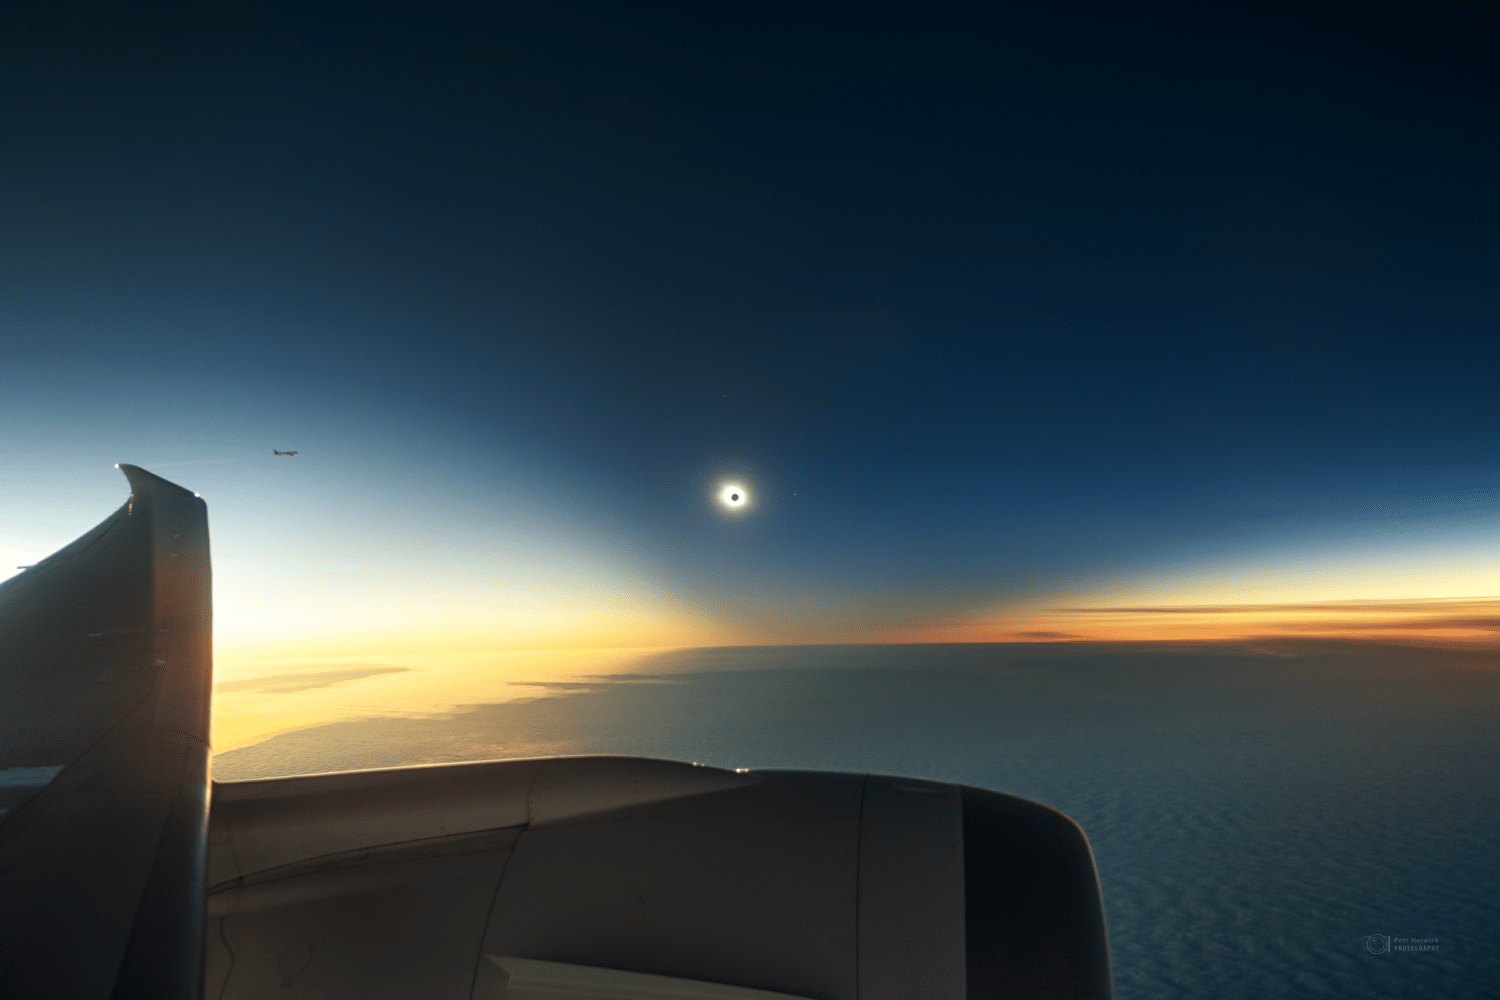 Eclipse from an airplane window over the Weddell Sea, part of the Antarctic Ocean - Peter Horak